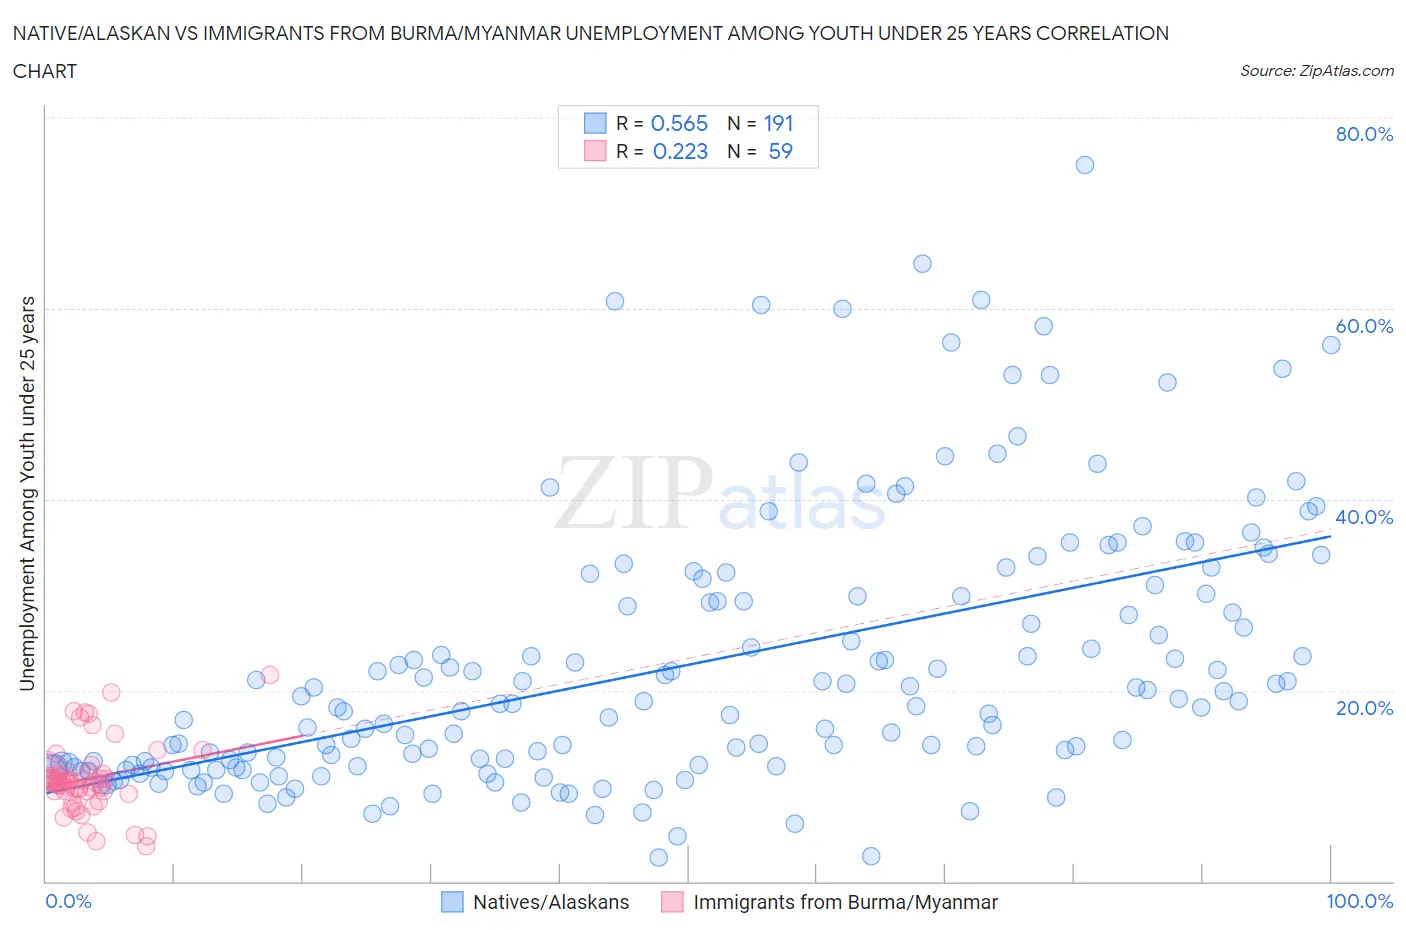 Native/Alaskan vs Immigrants from Burma/Myanmar Unemployment Among Youth under 25 years